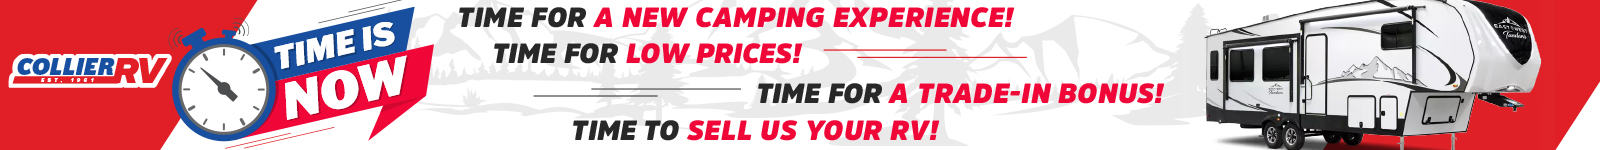 The Time is NOW for All-Time Low Prices on 2022 Models!